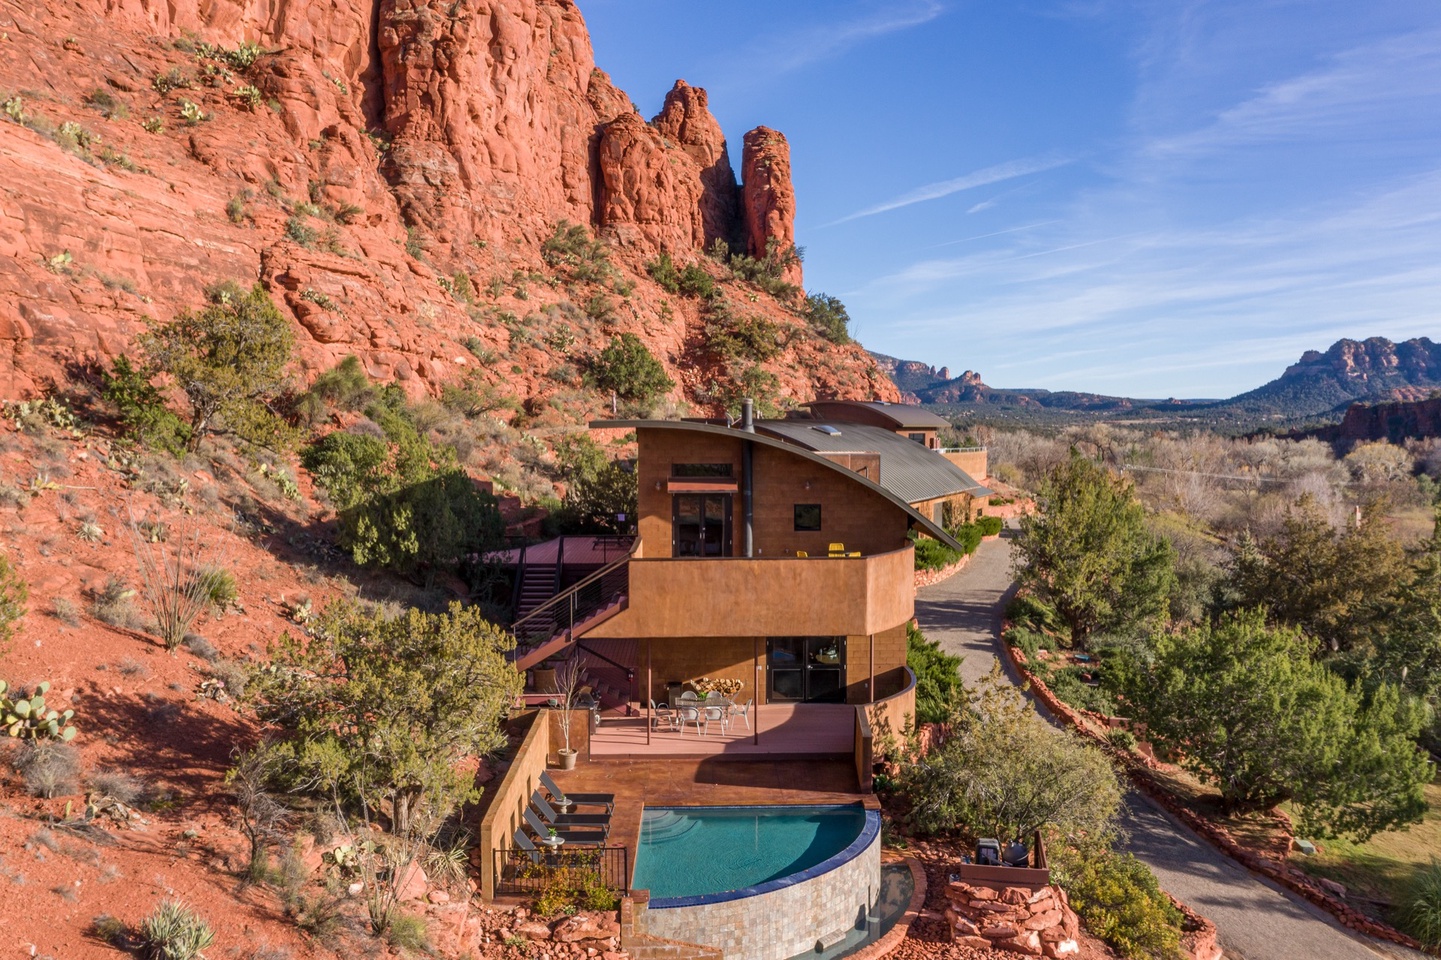 Welcome to The Sedona Cliff House